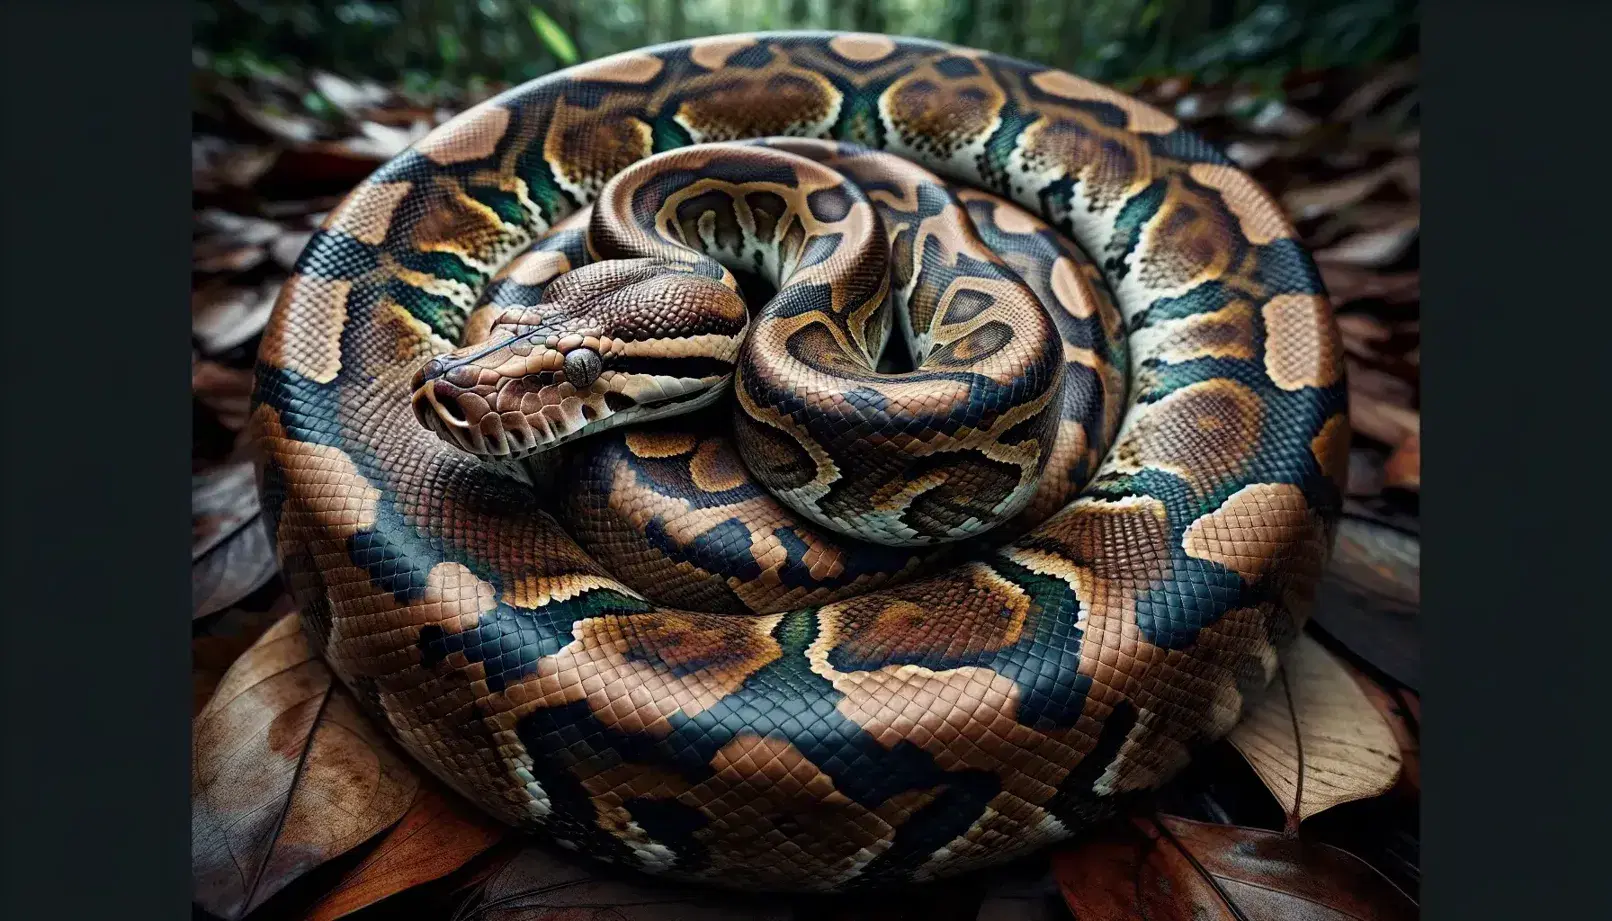 Python wrapped in concentric circles on forest floor, with brown and green scales, head raised and tongue sticking out.